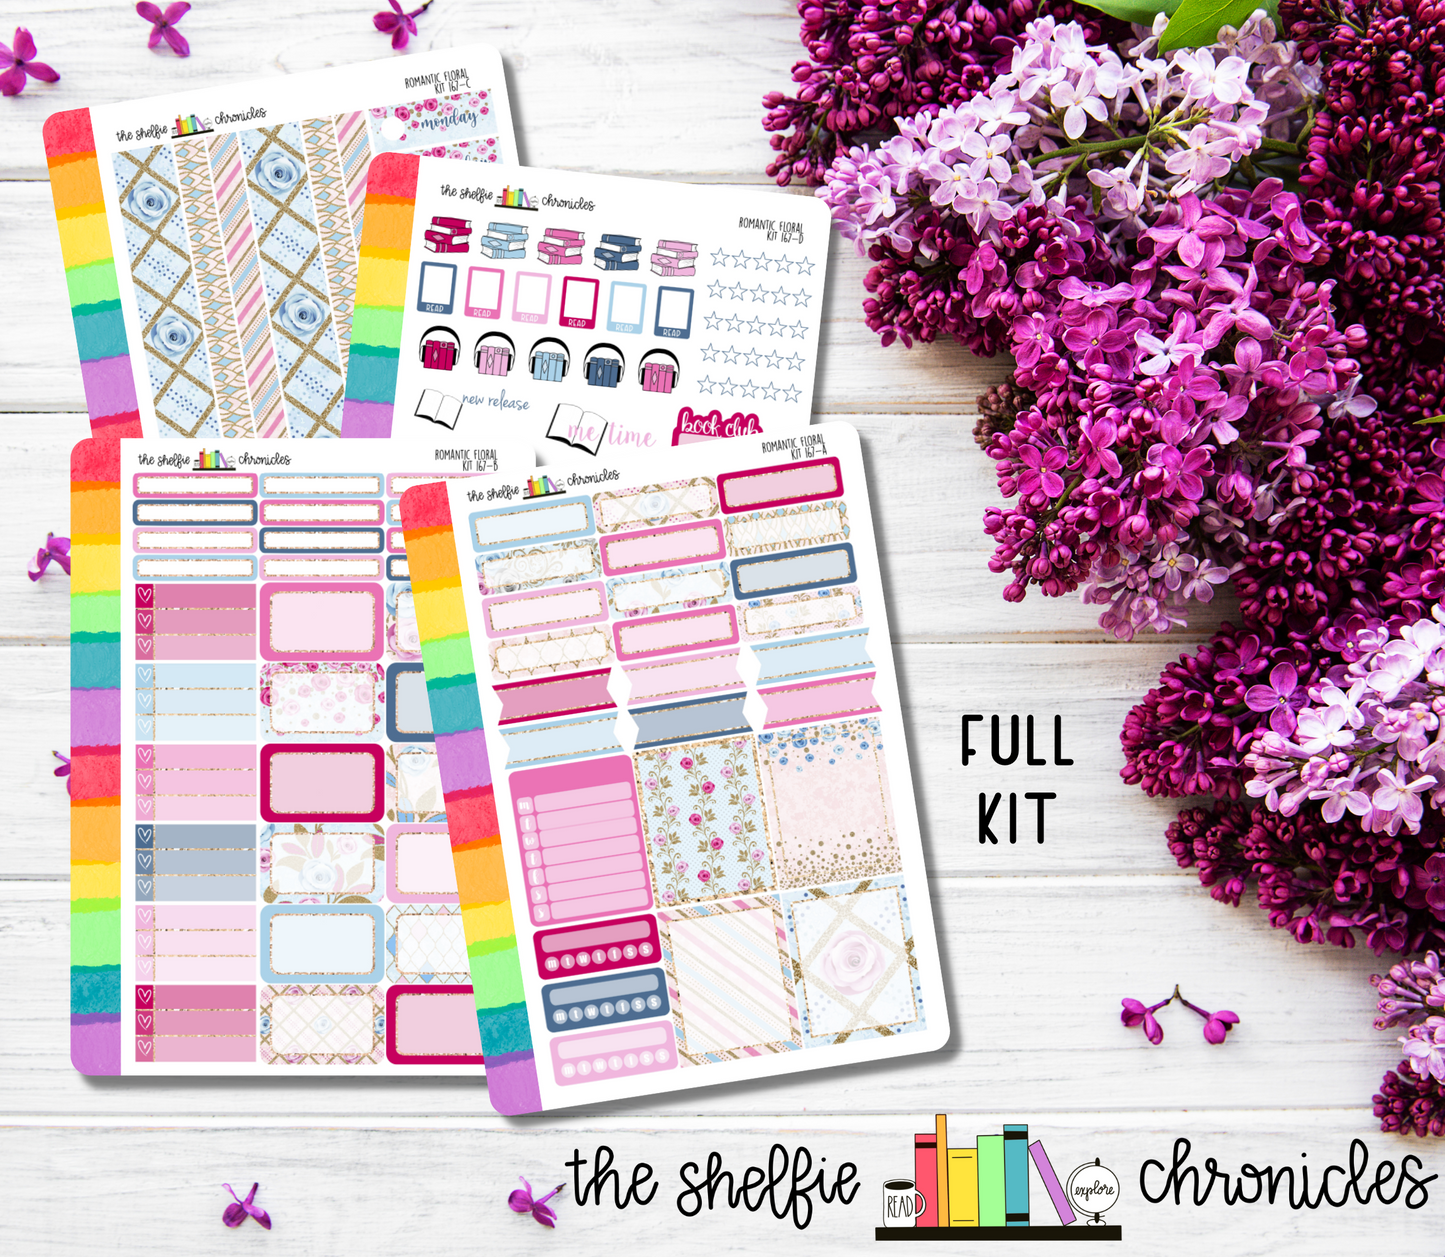 Kit 167 - Romantic Floral Weekly Kit - Die Cut Stickers - Repositionable Paper - Made To Fit 7x9 Planners